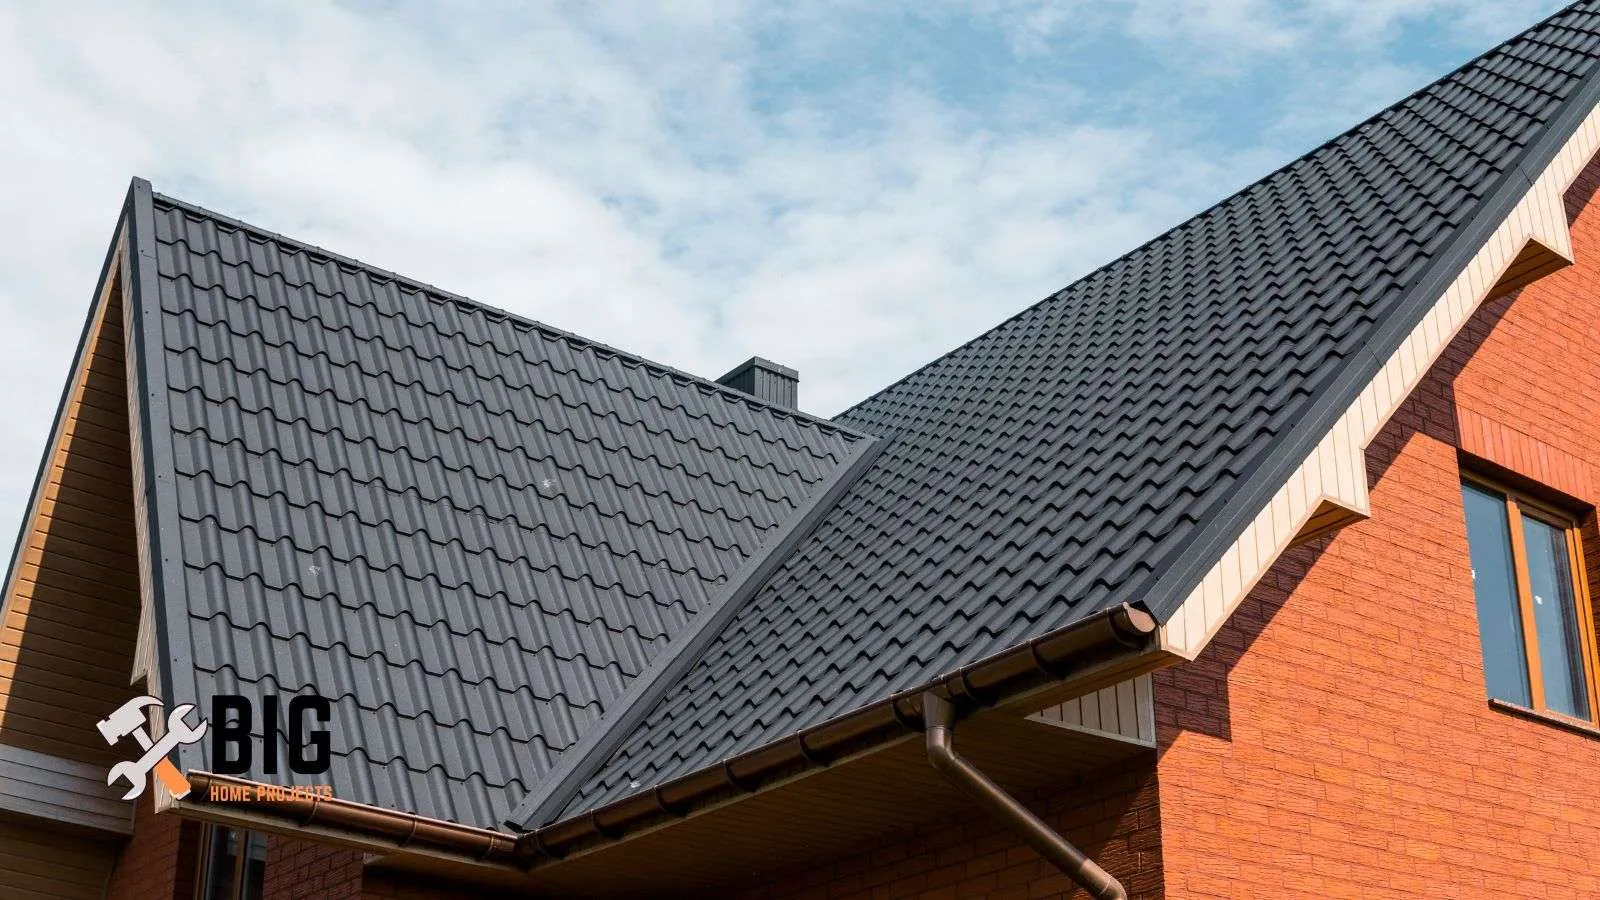 Stone coated steel roofing - bighomeprojects.com